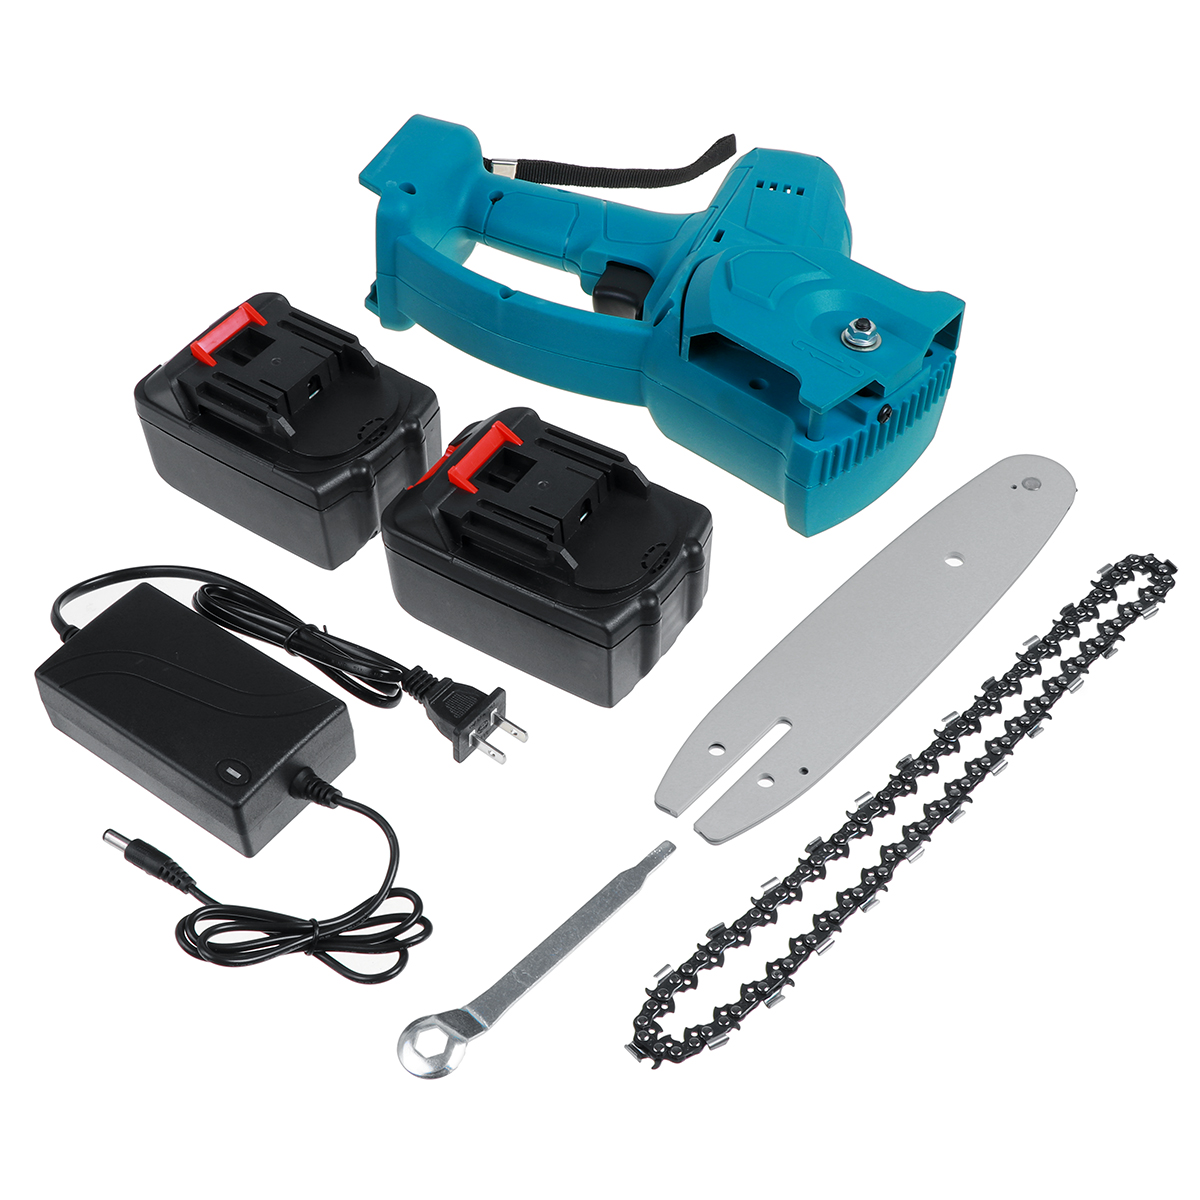 21V-8Inch-1080W-One-Hand-Saw-Woodworking-Electric-Cordless-ChainSaw-Wood-Cutter-Power-Tool-1806127-11